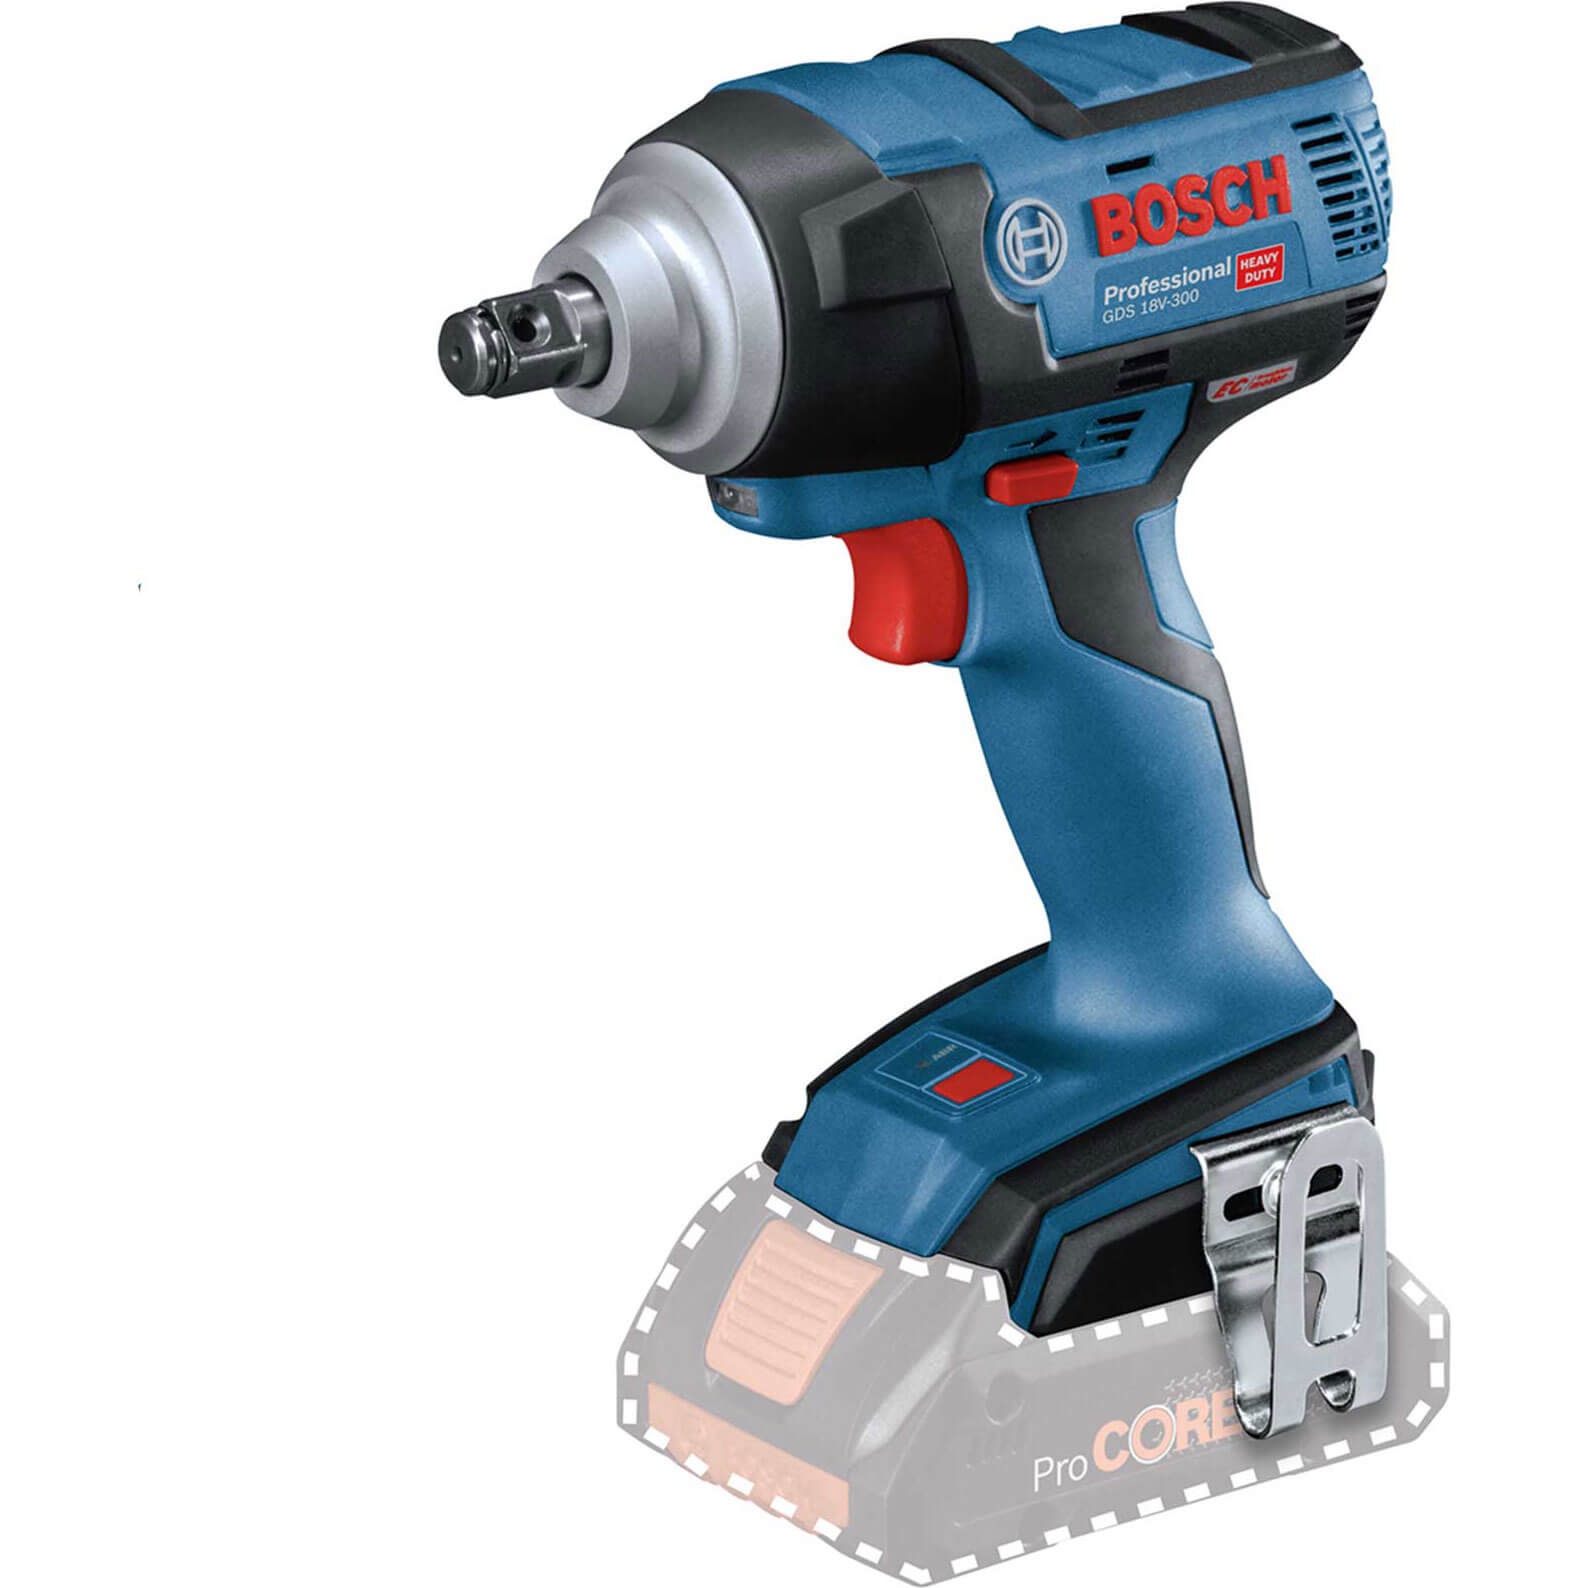 Bosch GDS 18V 300 Cordless Brushless 1/2" Drive Impact Wrench No Batteries No Charger No Case